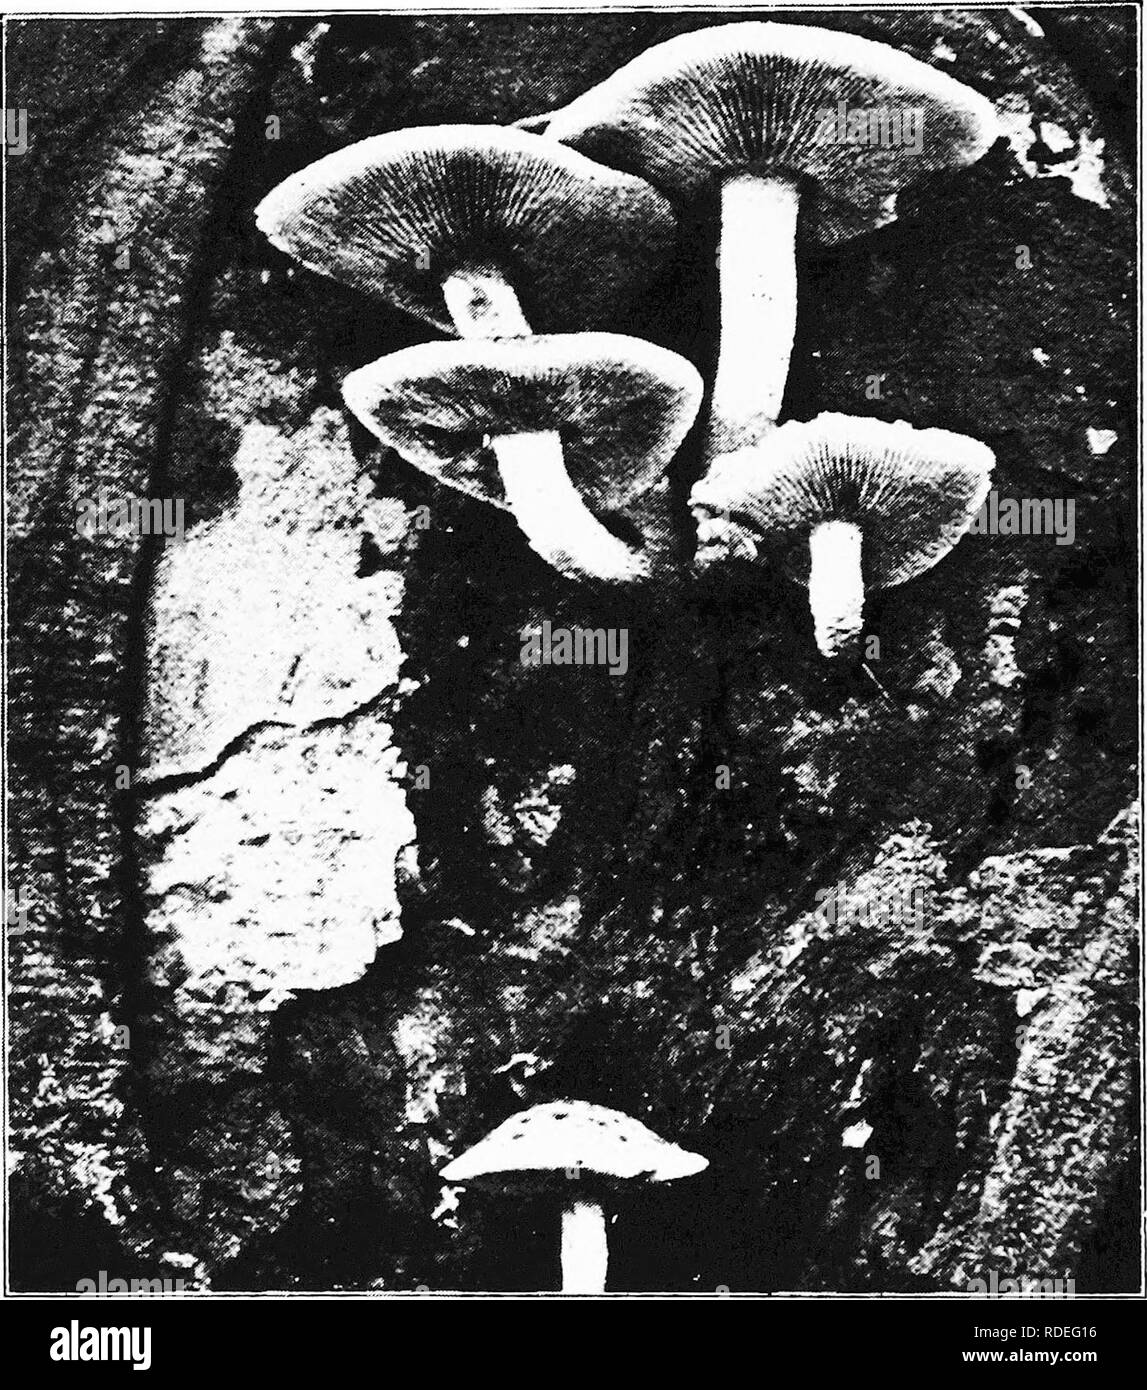 . A text-book of mycology and plant pathology . Plant diseases; Fungi in agriculture; Plant diseases; Fungi. 76 MYCOLOGY bodies growing on slicks and logs where they can dry up without any loss of vitality. They revive after a rainfall and resume the function of discharging spores and the discharged spores are capable of germina-. FiG. 24.—Pholiola adiposa growing from a wound in a living tree (edible). (After Patterson, Floraw and Charles, Vera K., Bull. 175, U. S, Depl. Agric, Apr.'2$, tion. Dadalea (Fig. 202), Polystictus and Stereum are typical genera of the xerophy tic log flora. Buller'  Stock Photo